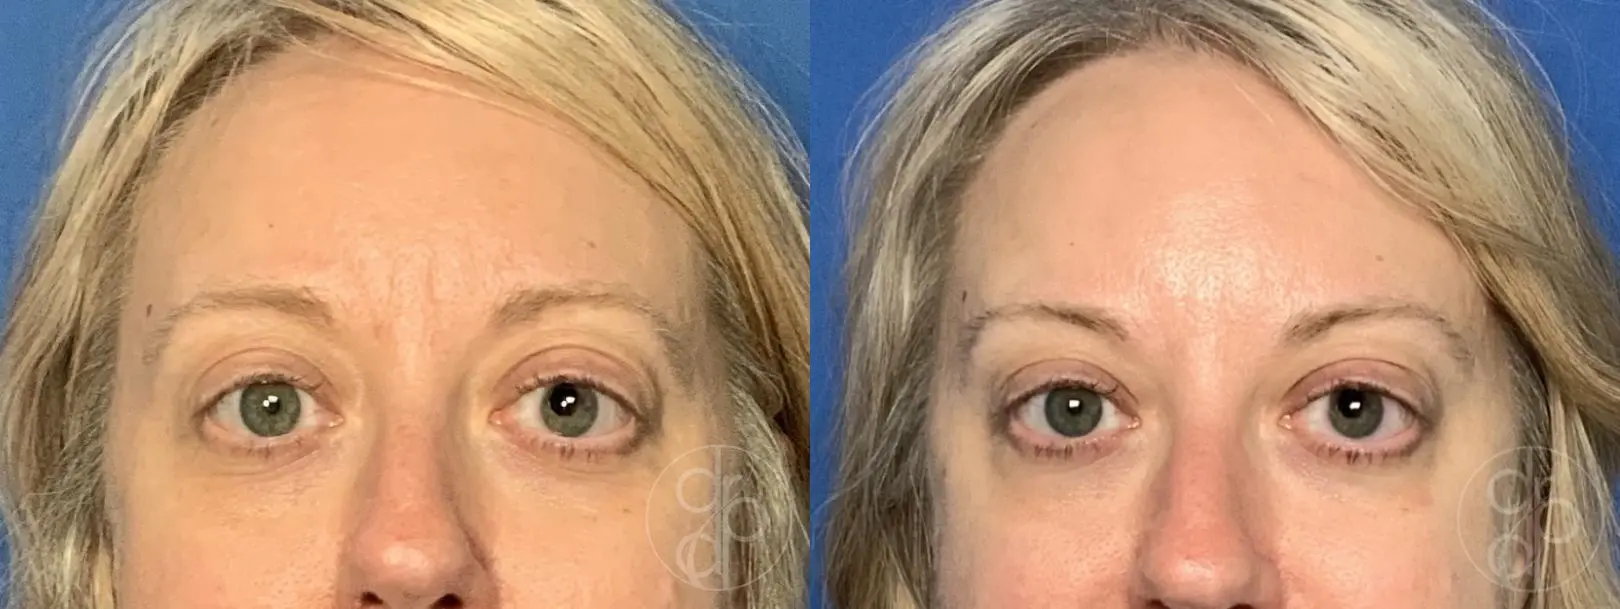 patient 14169 injectables before and after result - Before and After